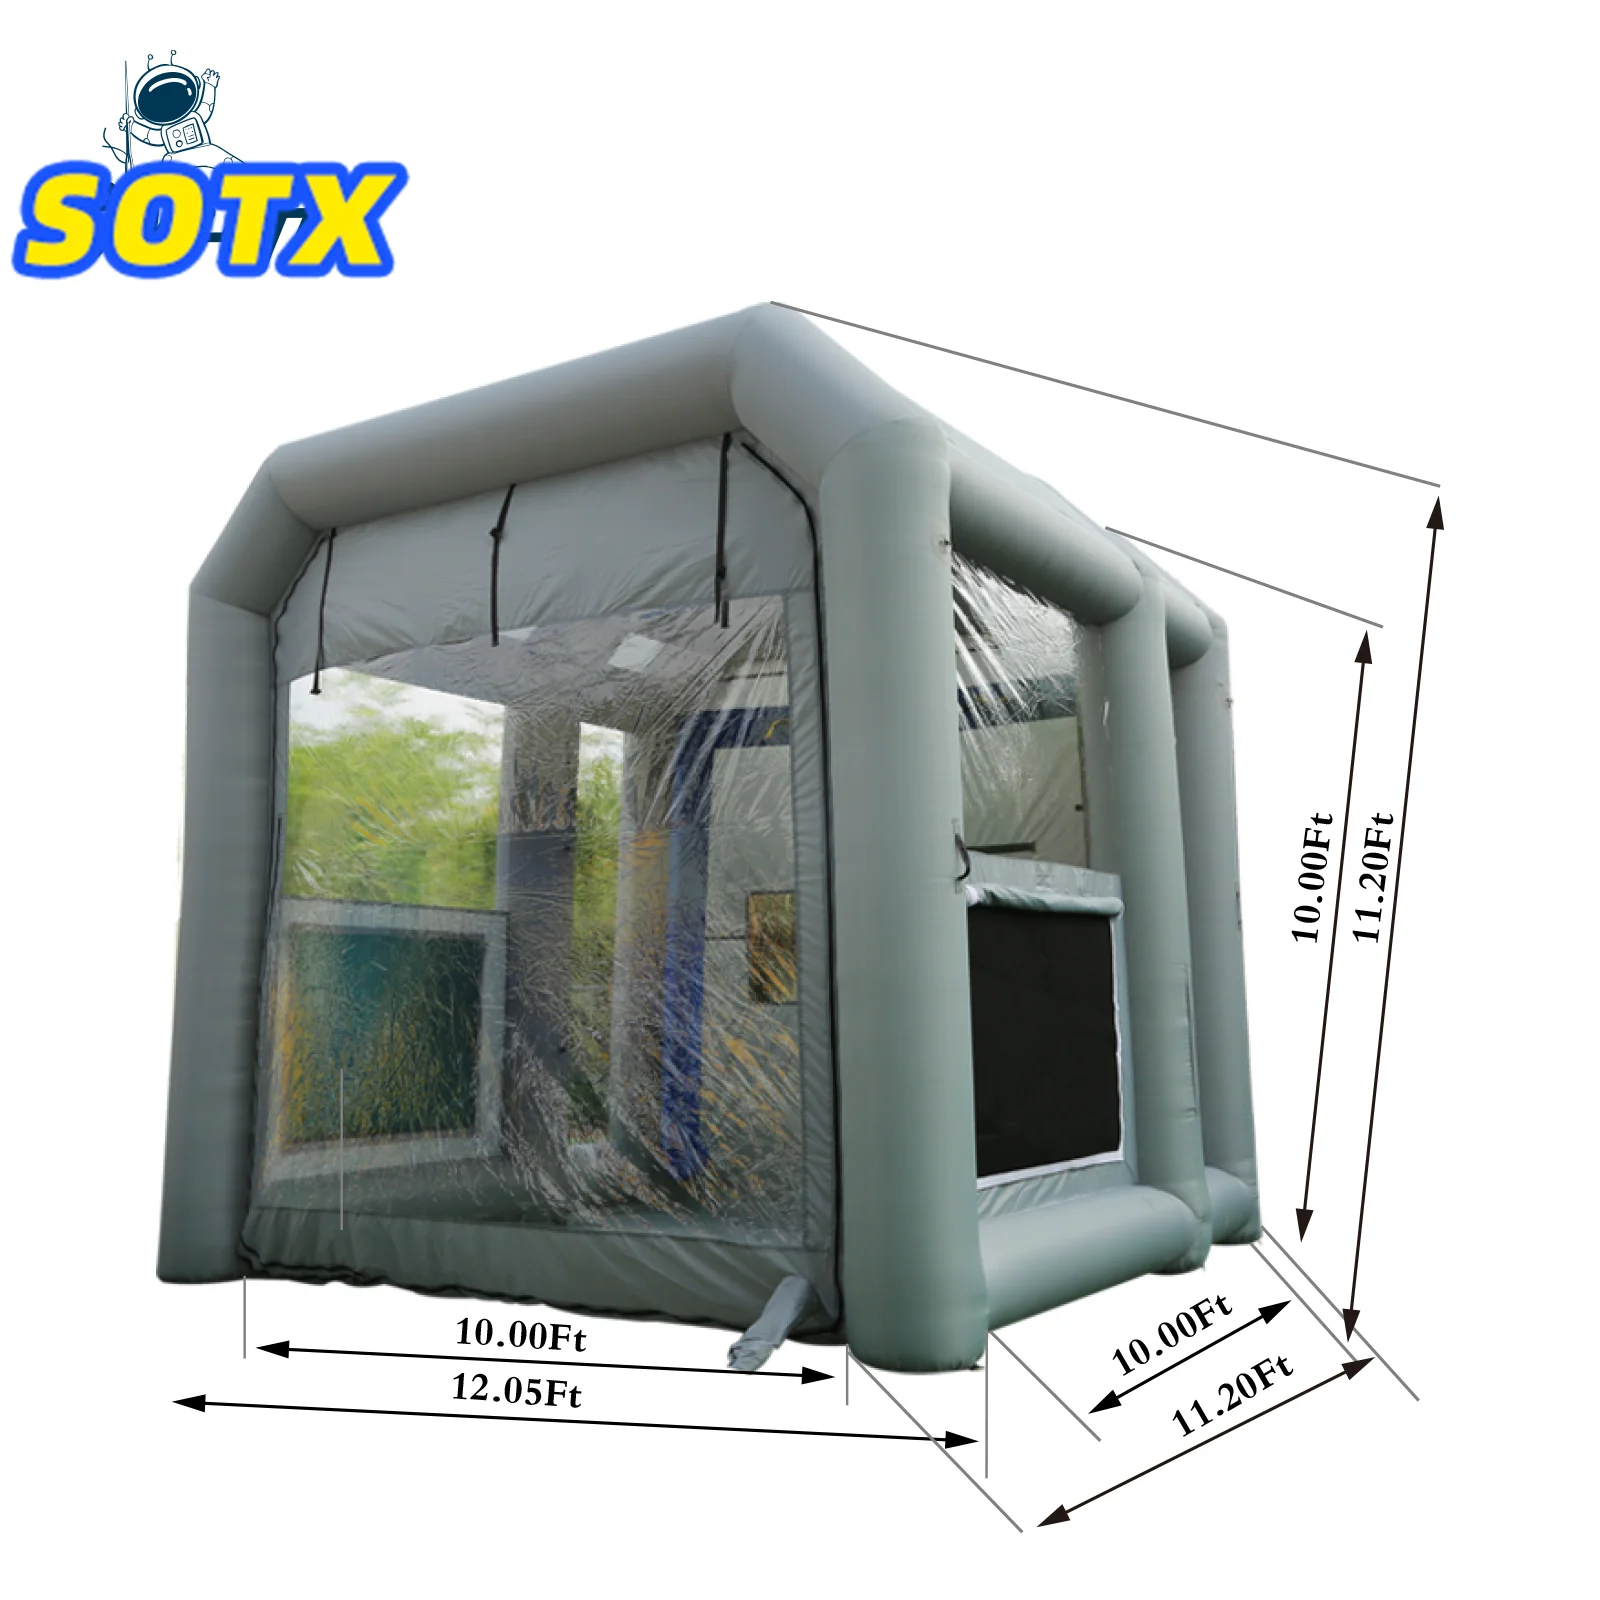 Sewinfla Inflatable Paint Booth 28x15x11Ft with Blowers Professional  Inflatable Spray Booth Portable Car Painting Booth Tent - AliExpress